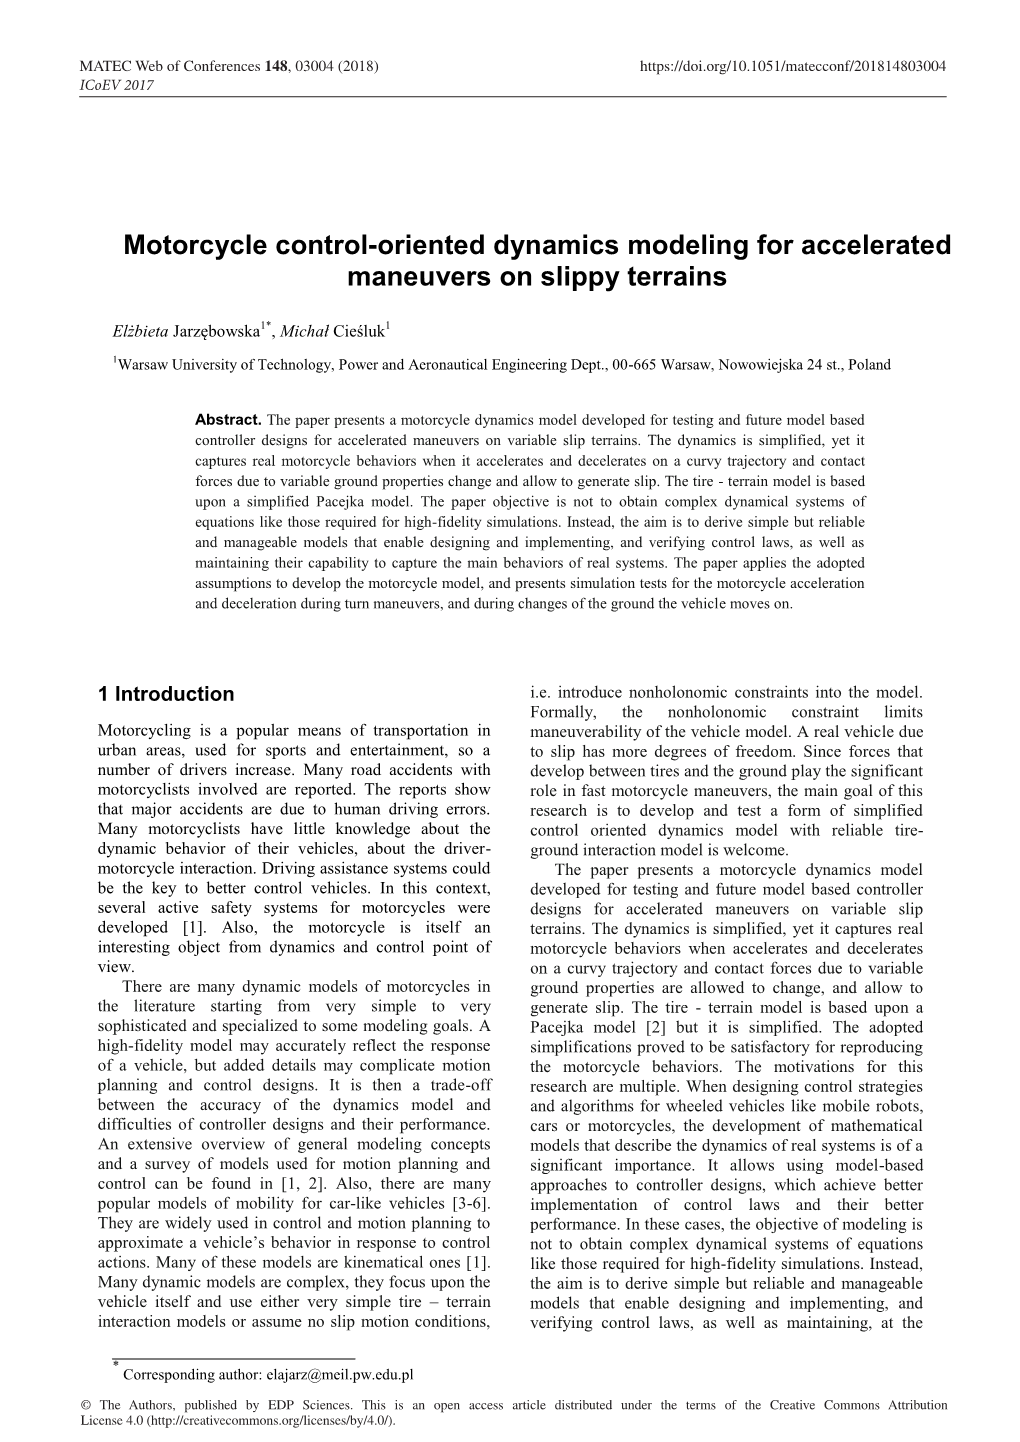 Motorcycle Control-Oriented Dynamics Modeling for Accelerated Maneuvers on Slippy Terrains